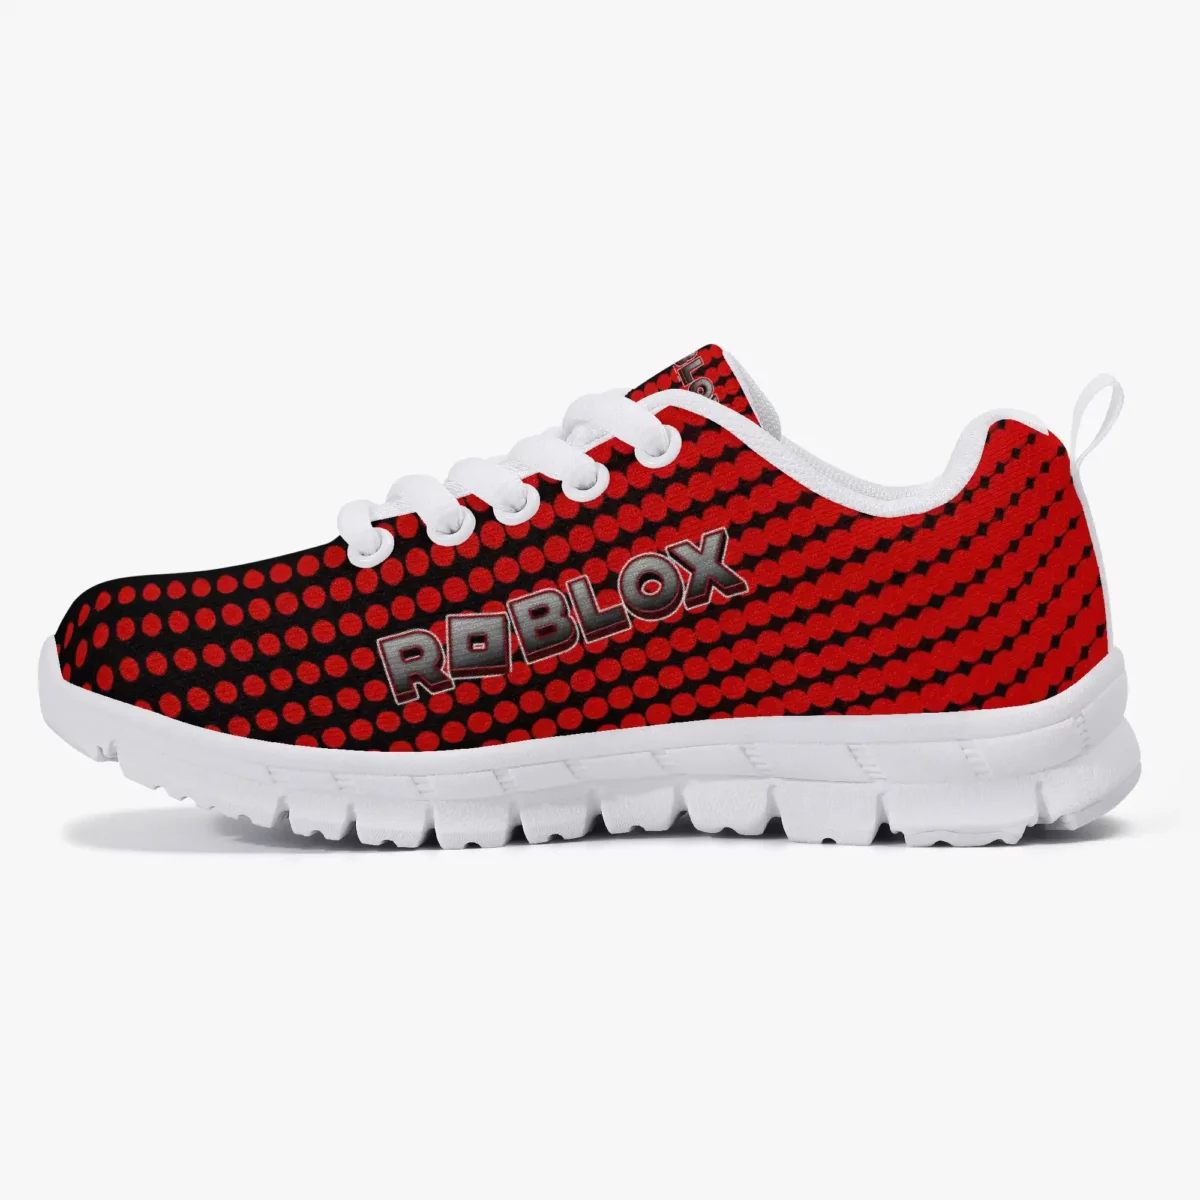 Personalized Roblox Video Game Red Shoes for Boys Lightweight Mesh Blue Sneakers Cool Kiddo 22